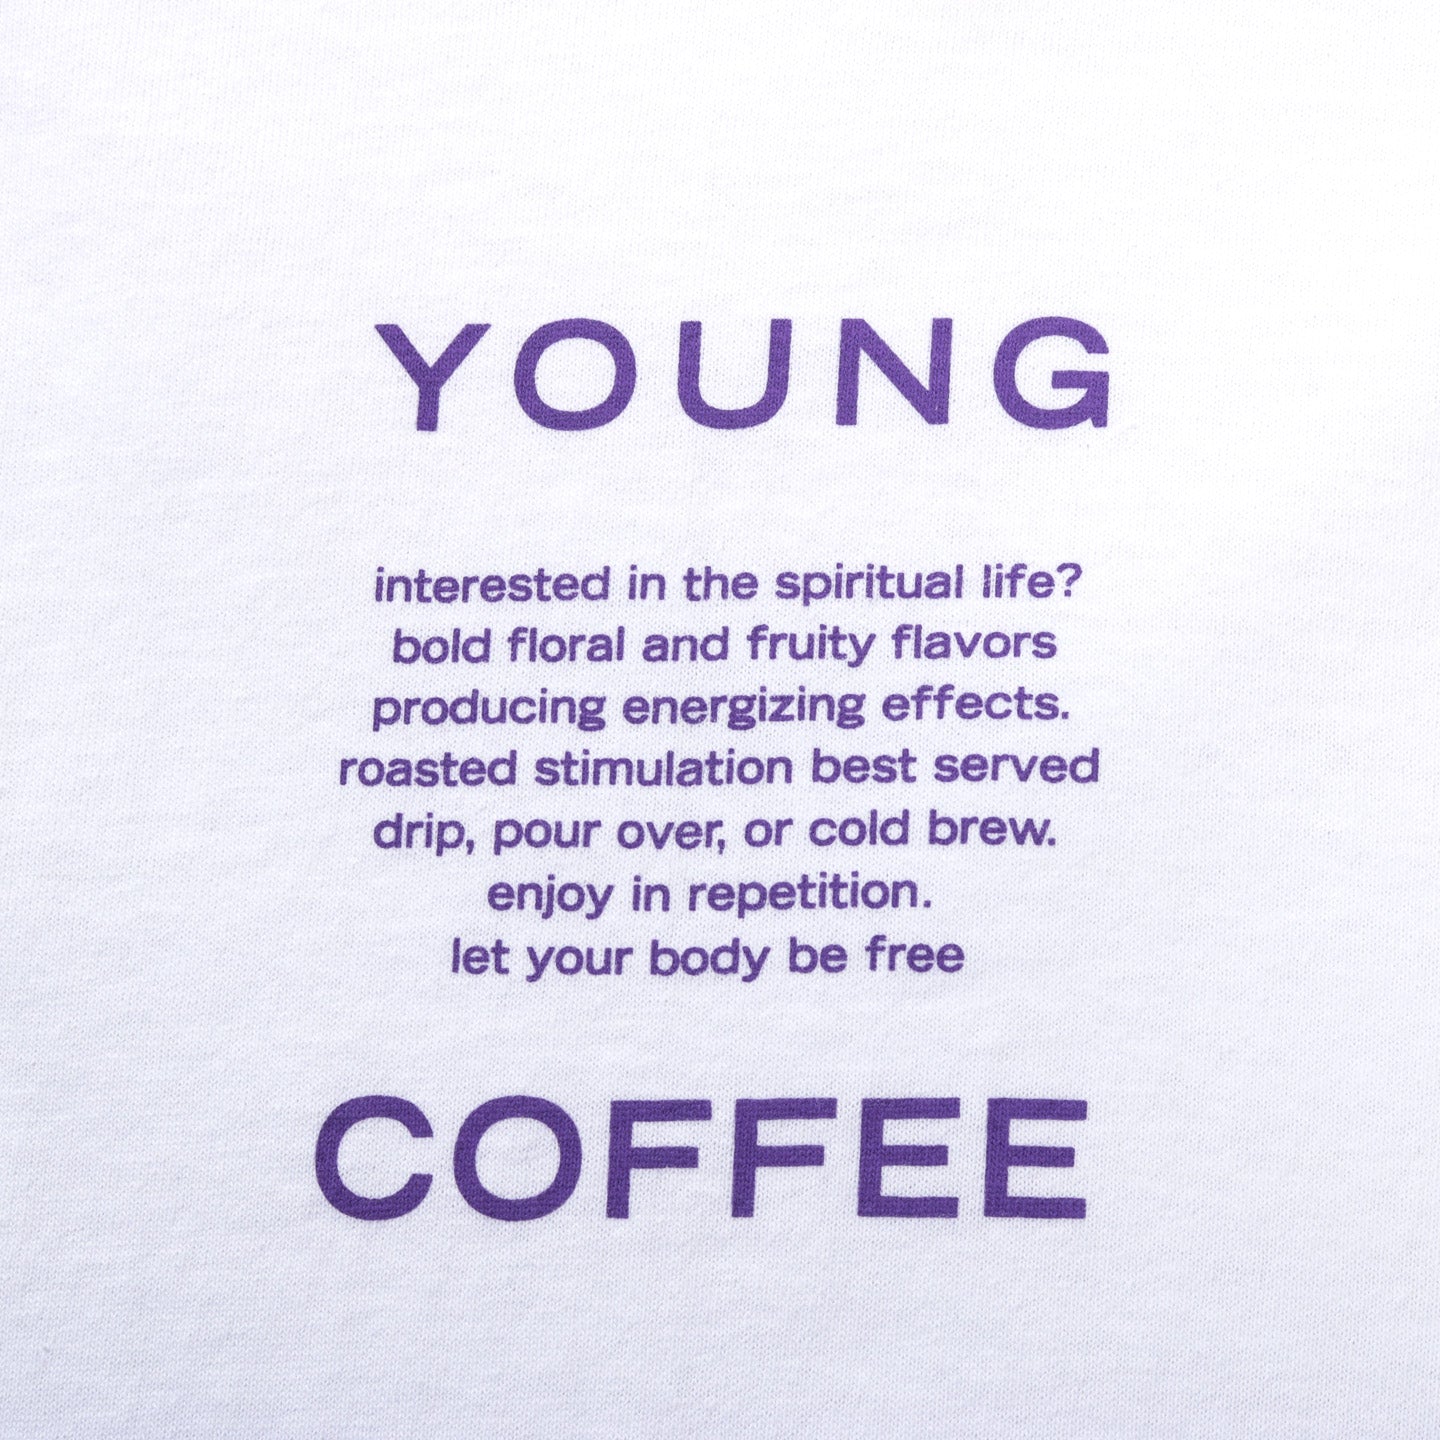 YOUNG COFFEE LABEL TEE WHITE